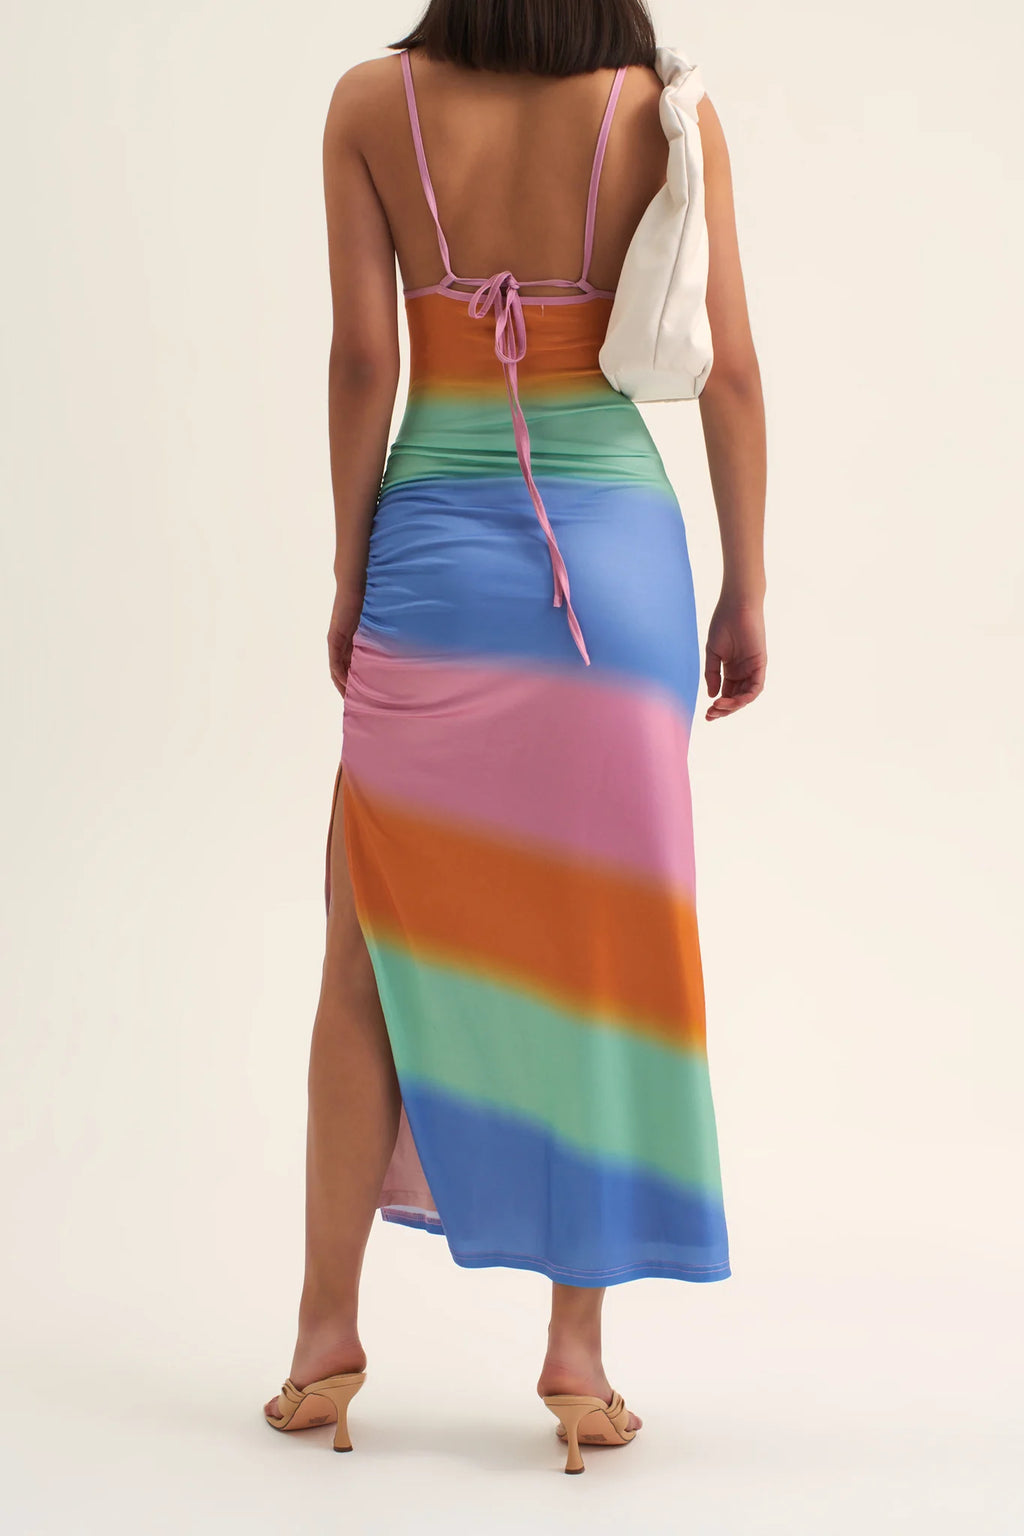 Ownley - Lydia Fitted Maxi Dress - Rainbow